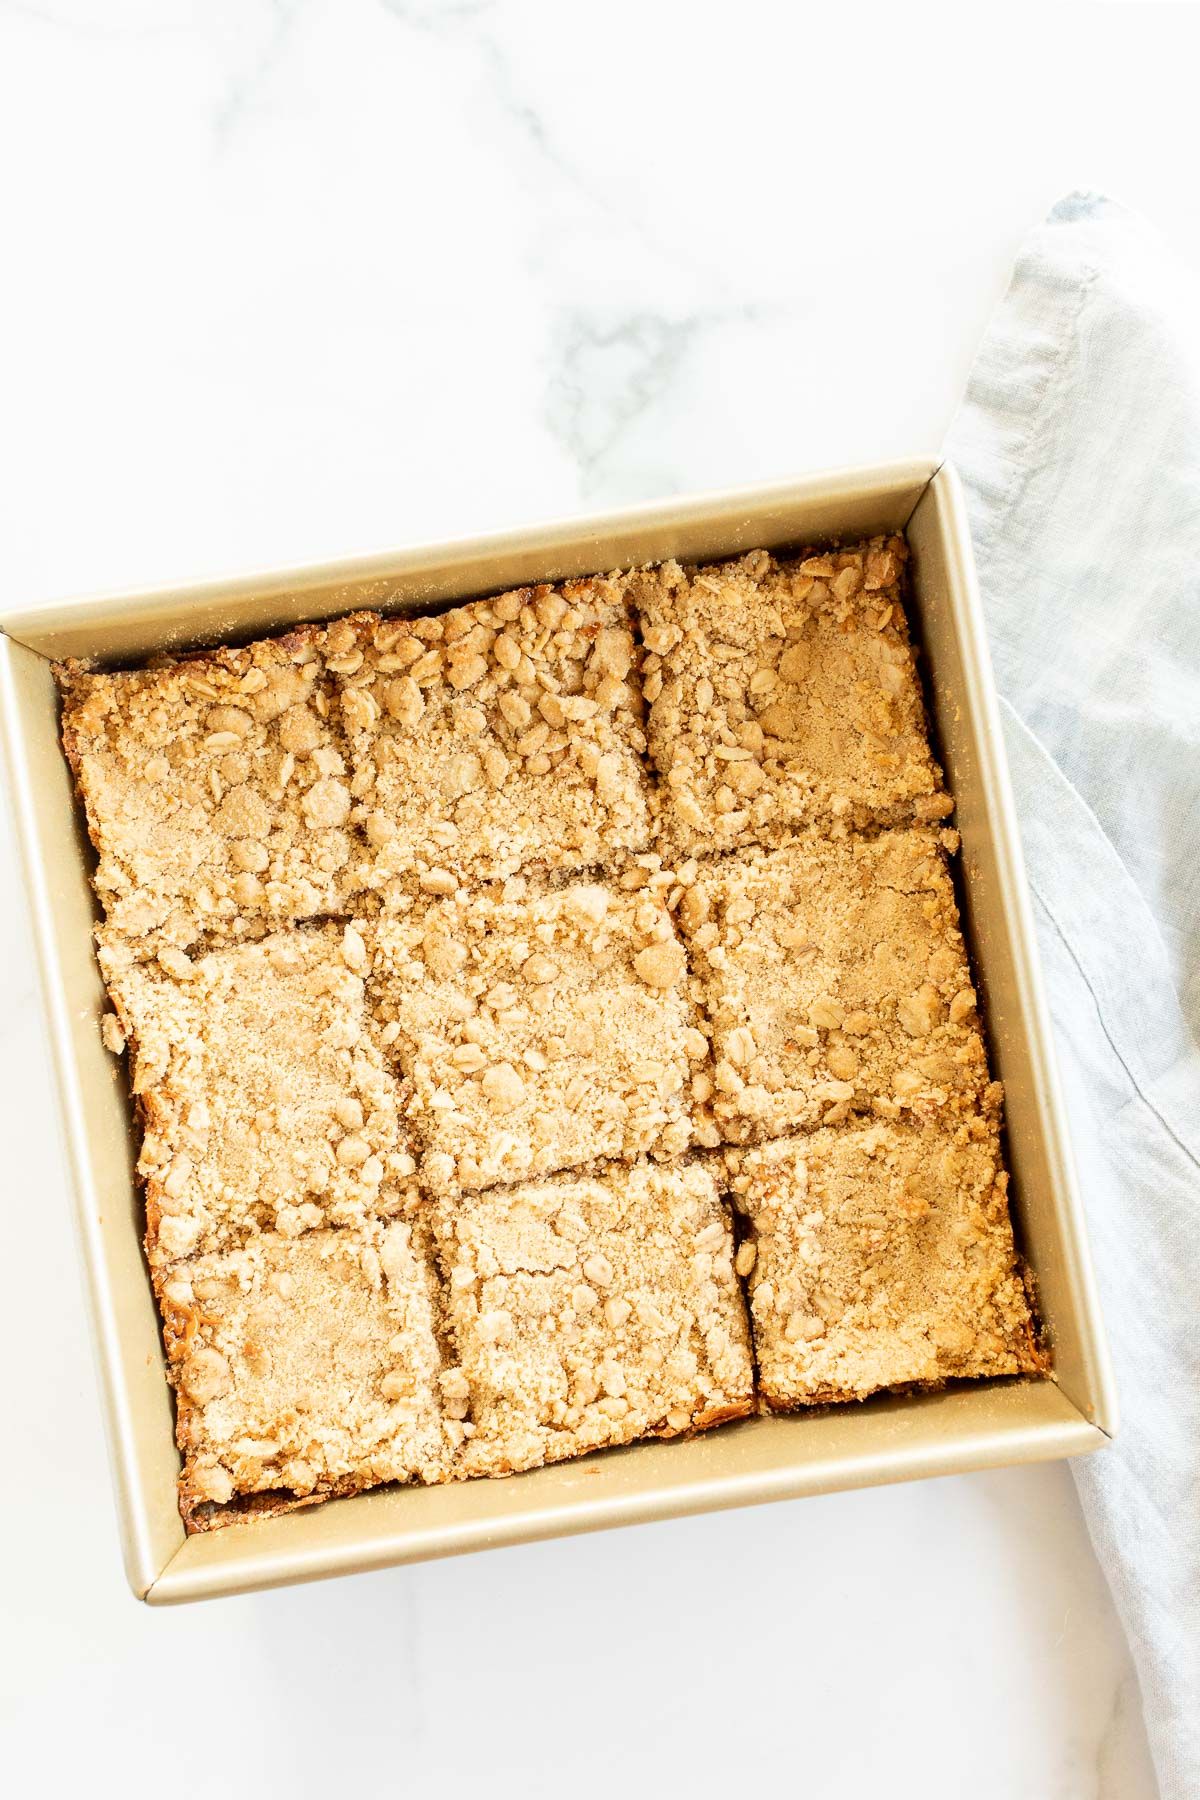 Caramel oatmeal chocolate chip bars baked in a gold baking pan, sliced for serving.